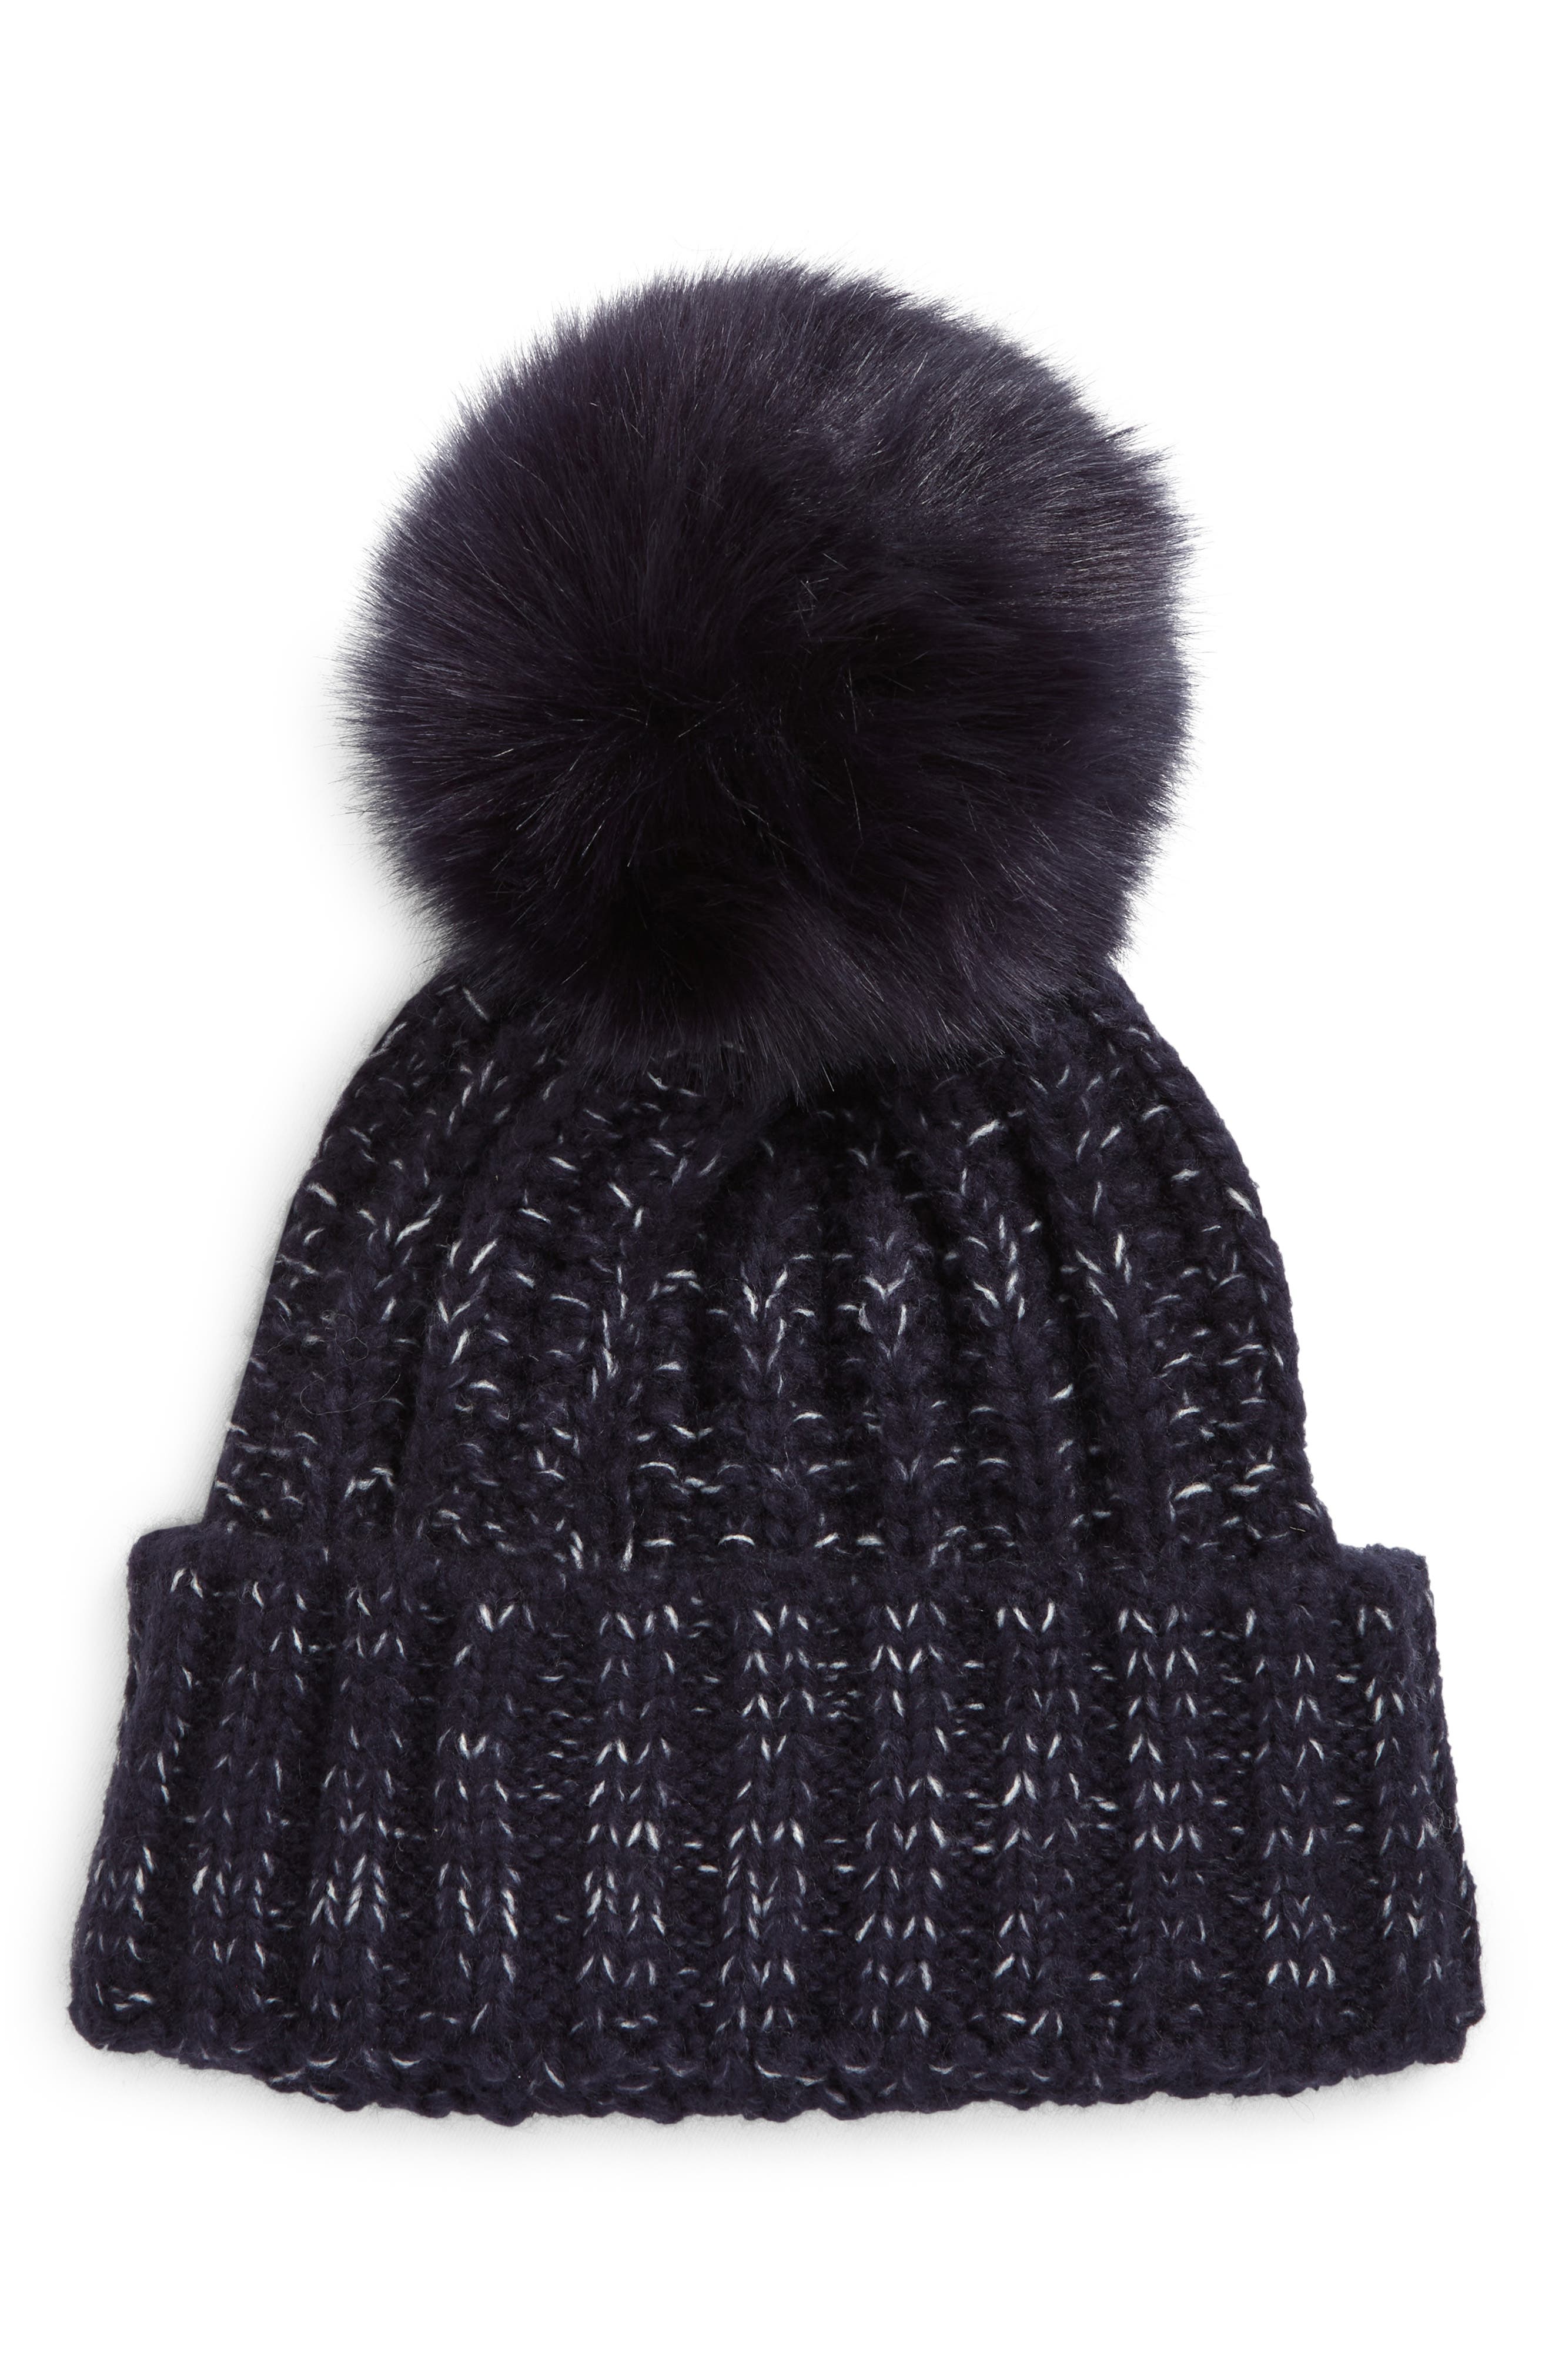 Kyi Kyi Chunky Wool Blend Beanie with Faux Fur Pom in Silver/Grey Black Tip at Nordstrom